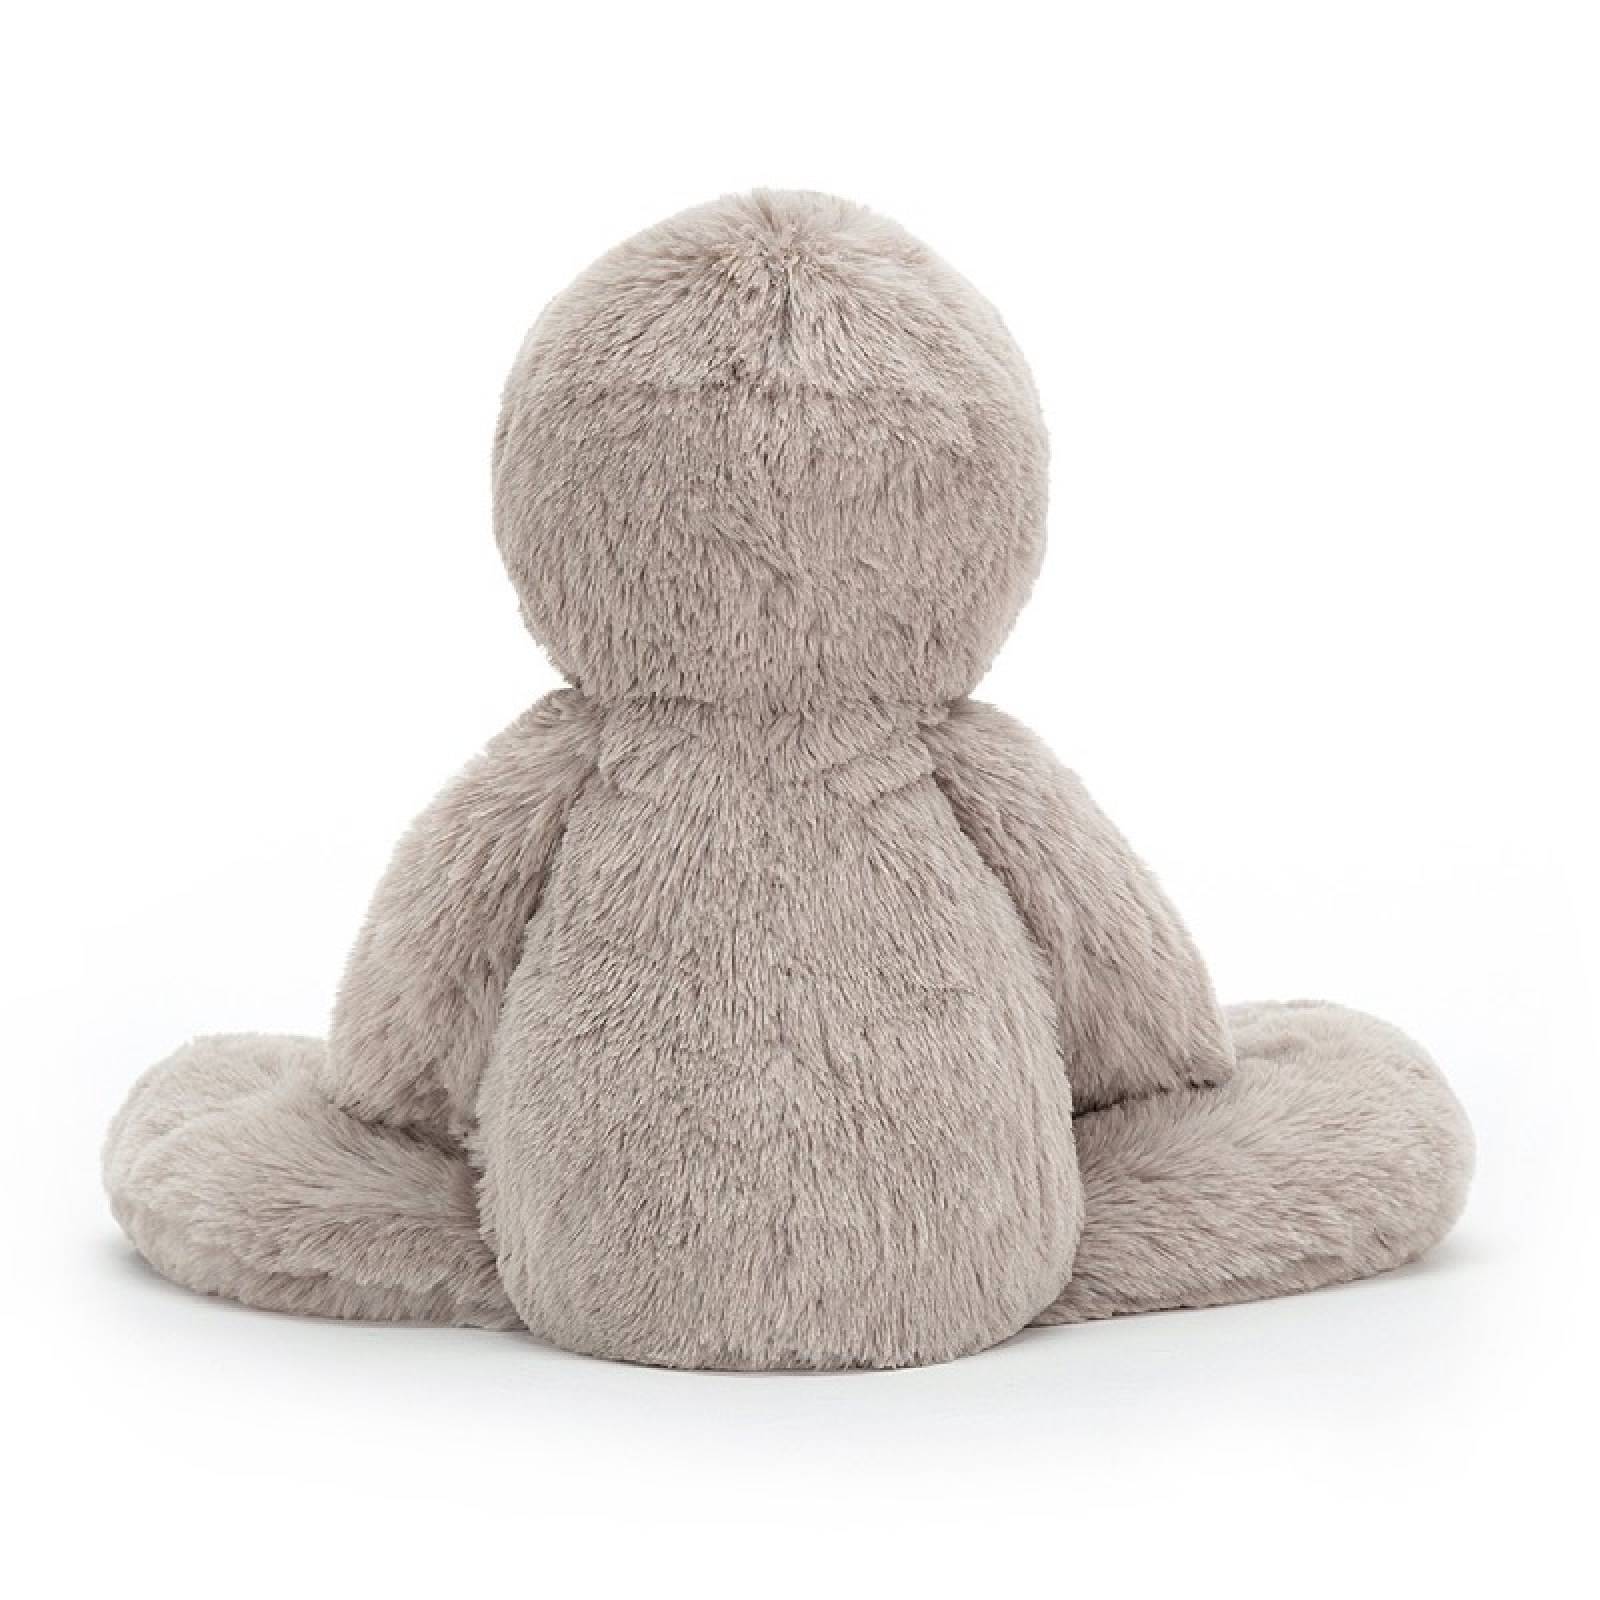 Medium Bailey Sloth Soft Toy By Jellycat 0+ thumbnails